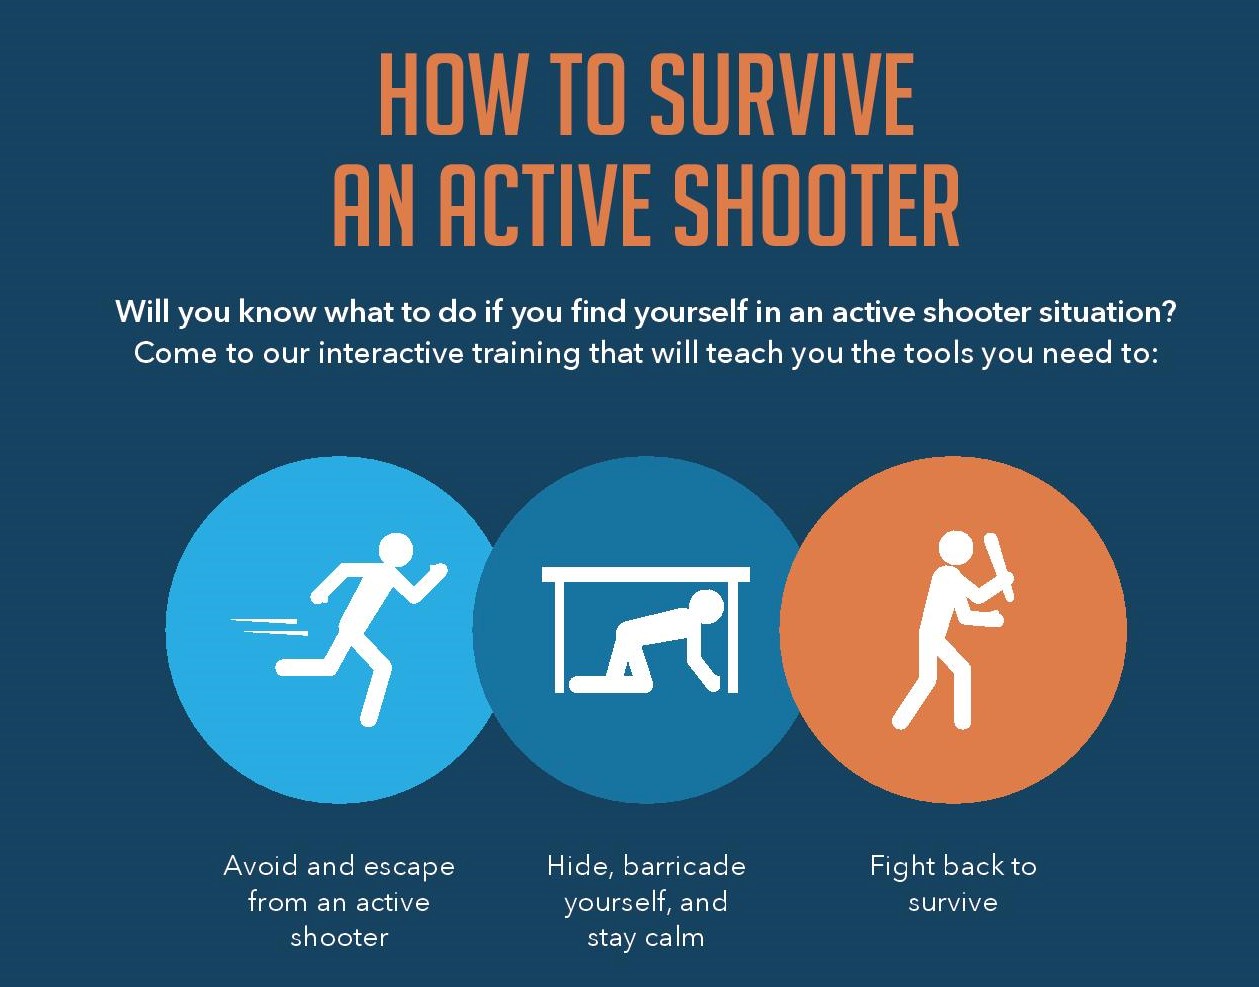 Active shooter отзывы. Active Shooter. Active Shooter запрещен. Active Shooter in the building. Компанией Active Shooter..